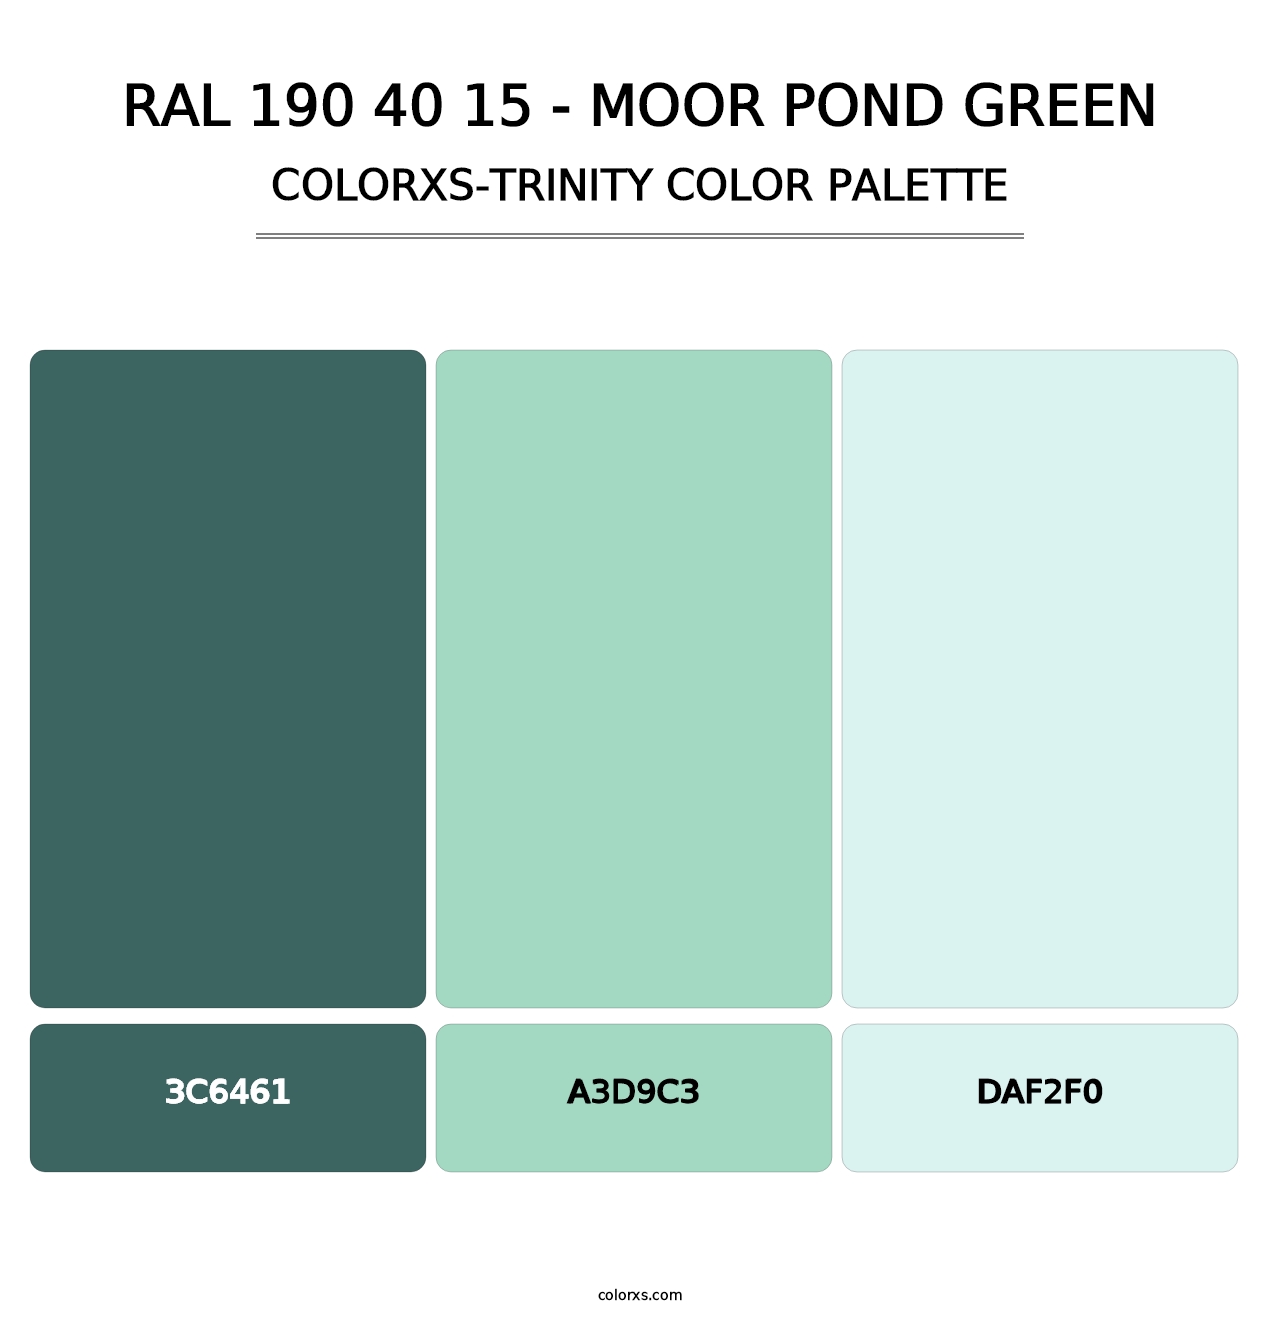 RAL 190 40 15 - Moor Pond Green - Colorxs Trinity Palette